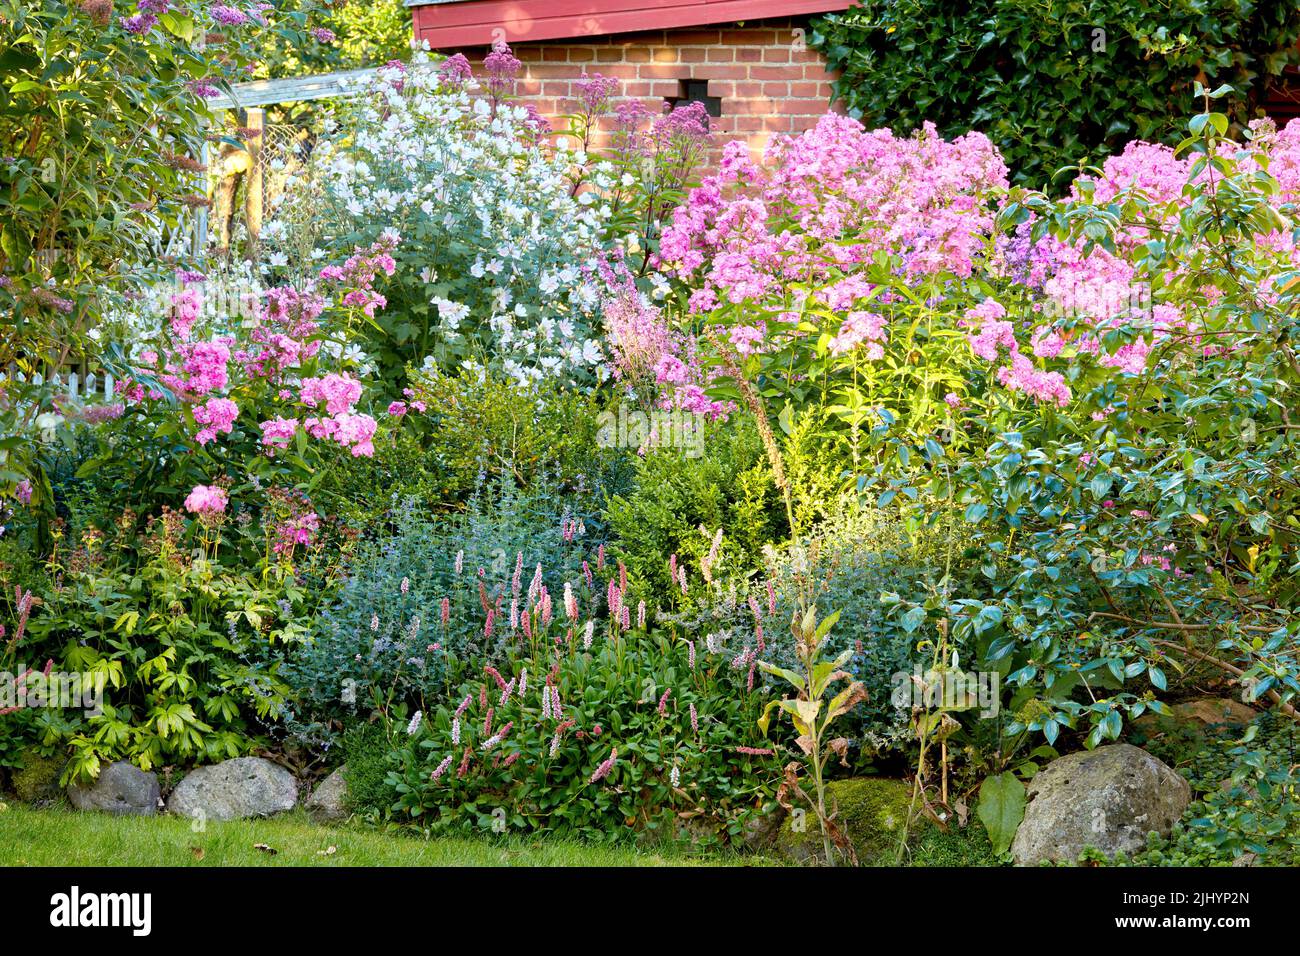 Lush landscape with various flowering plants growing in a garden on a sunny day outdoors in spring. Vibrant pink fall phlox and alpine bistort or Stock Photo